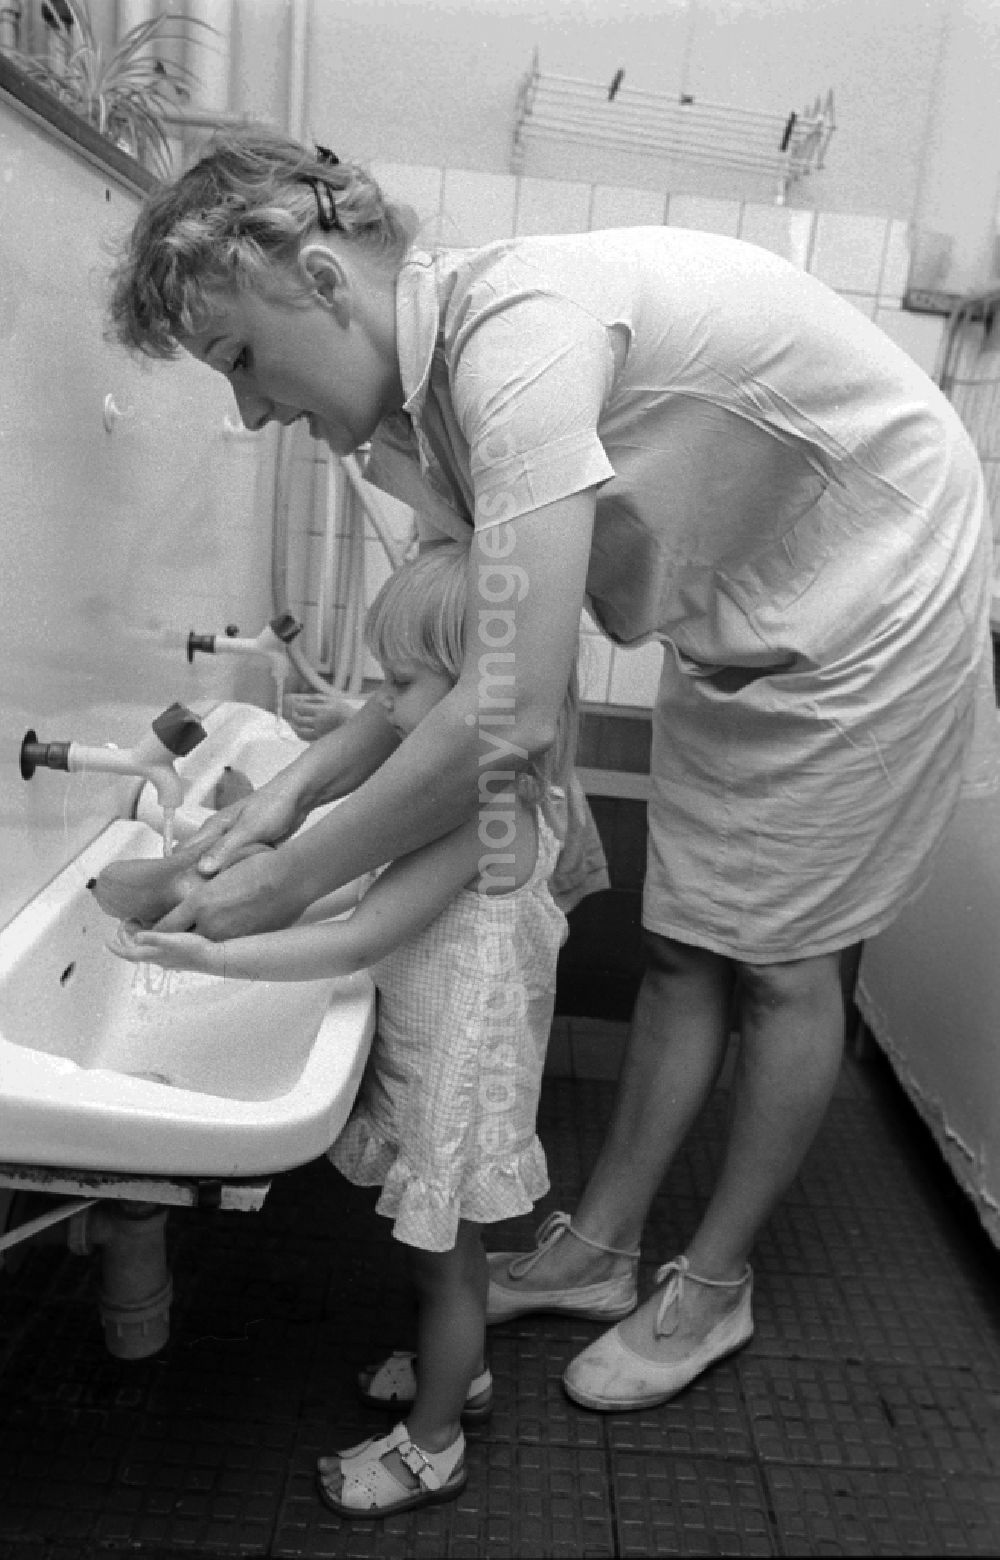 GDR image archive: Berlin - The educator helps children in the hand wash in the wash basin in a children cooked in Berlin, the former capital of the GDR, German democratic republic